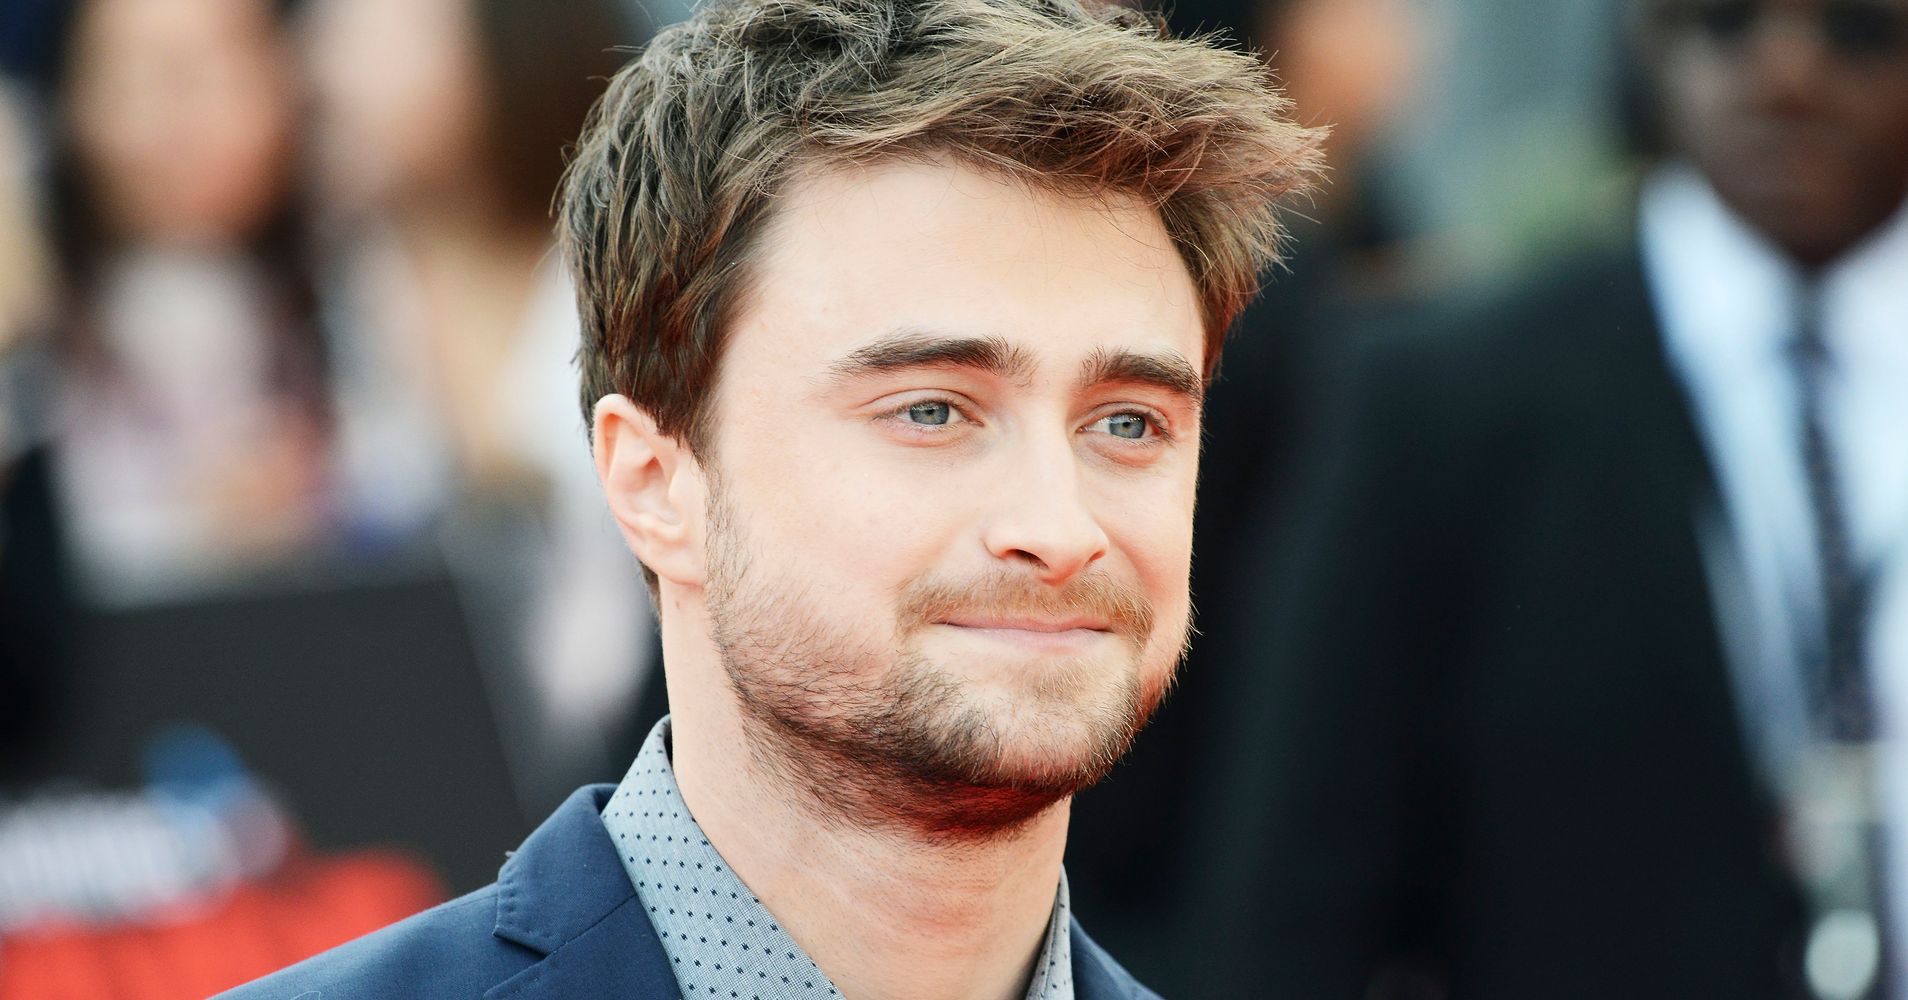 Hero IRL Daniel Radcliffe Comes To The Rescue Of Mugging Victim | HuffPost